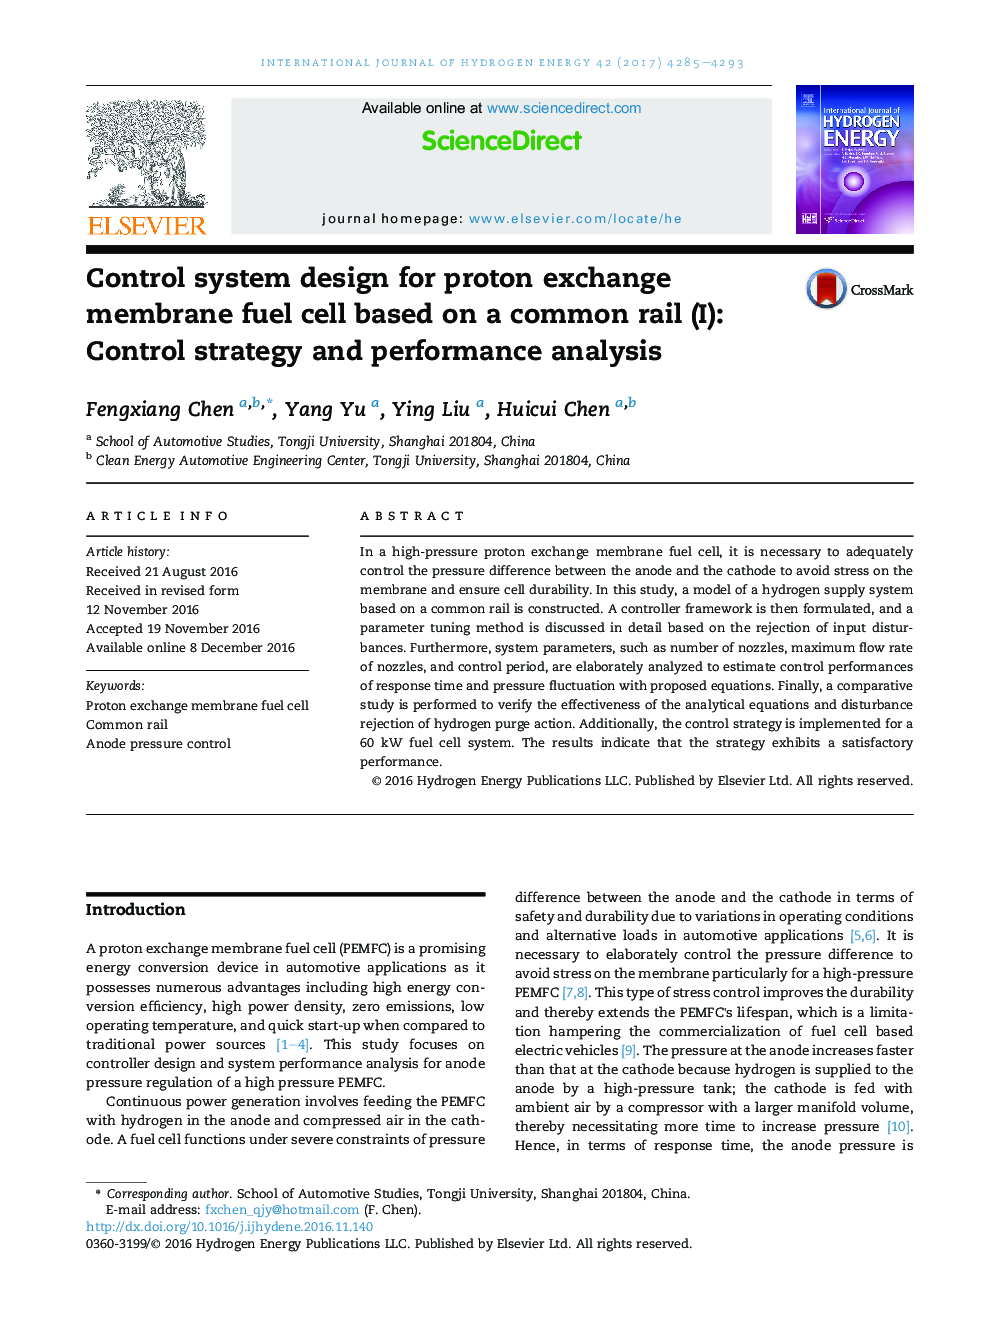 Control system design for proton exchange membrane fuel cell based on a common rail (I): Control strategy and performance analysis